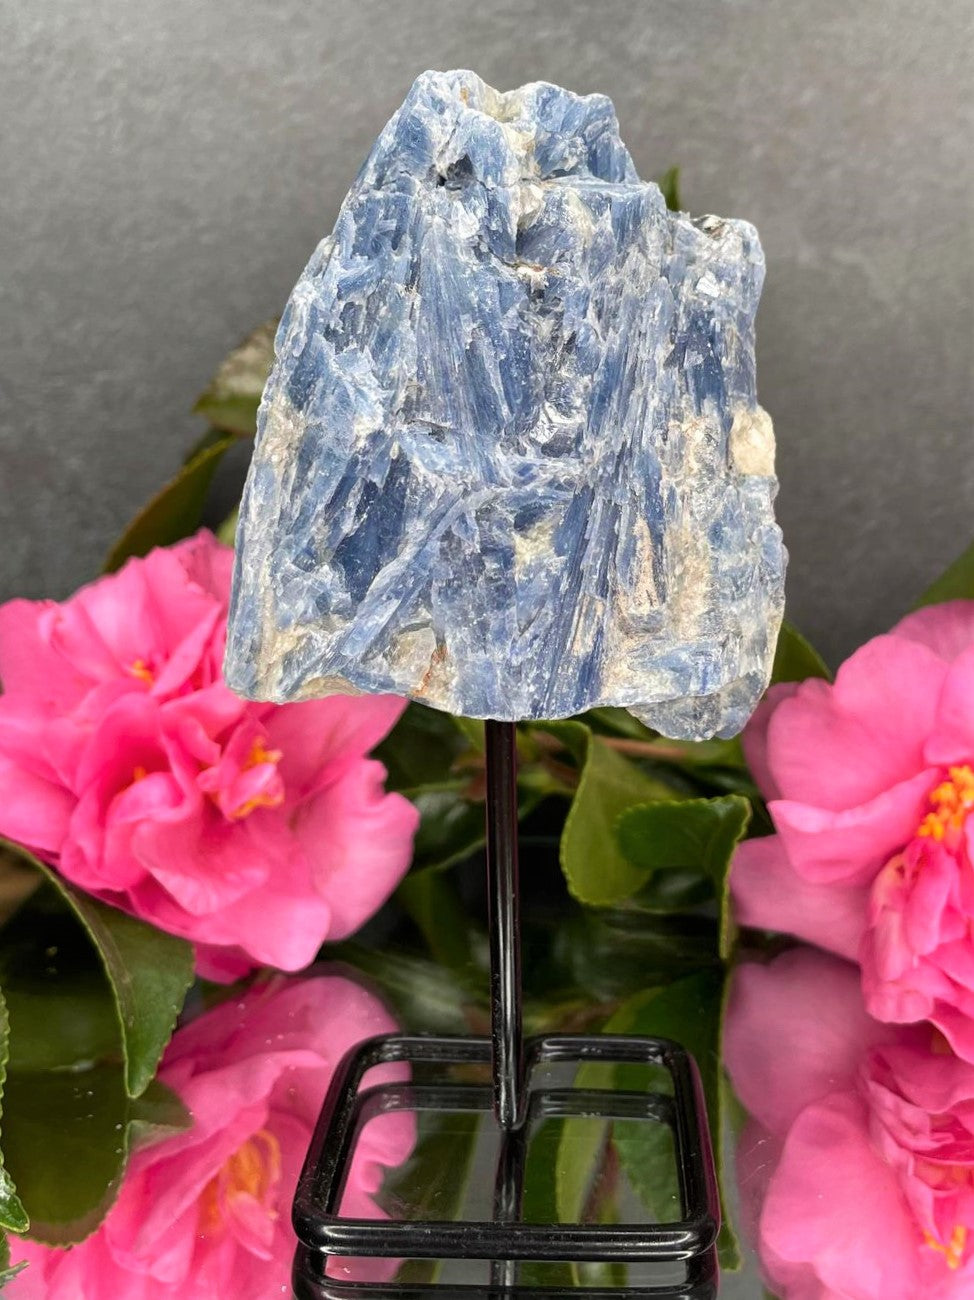 Natural Kyanite Crystal Rough Stone On Fixed Stand